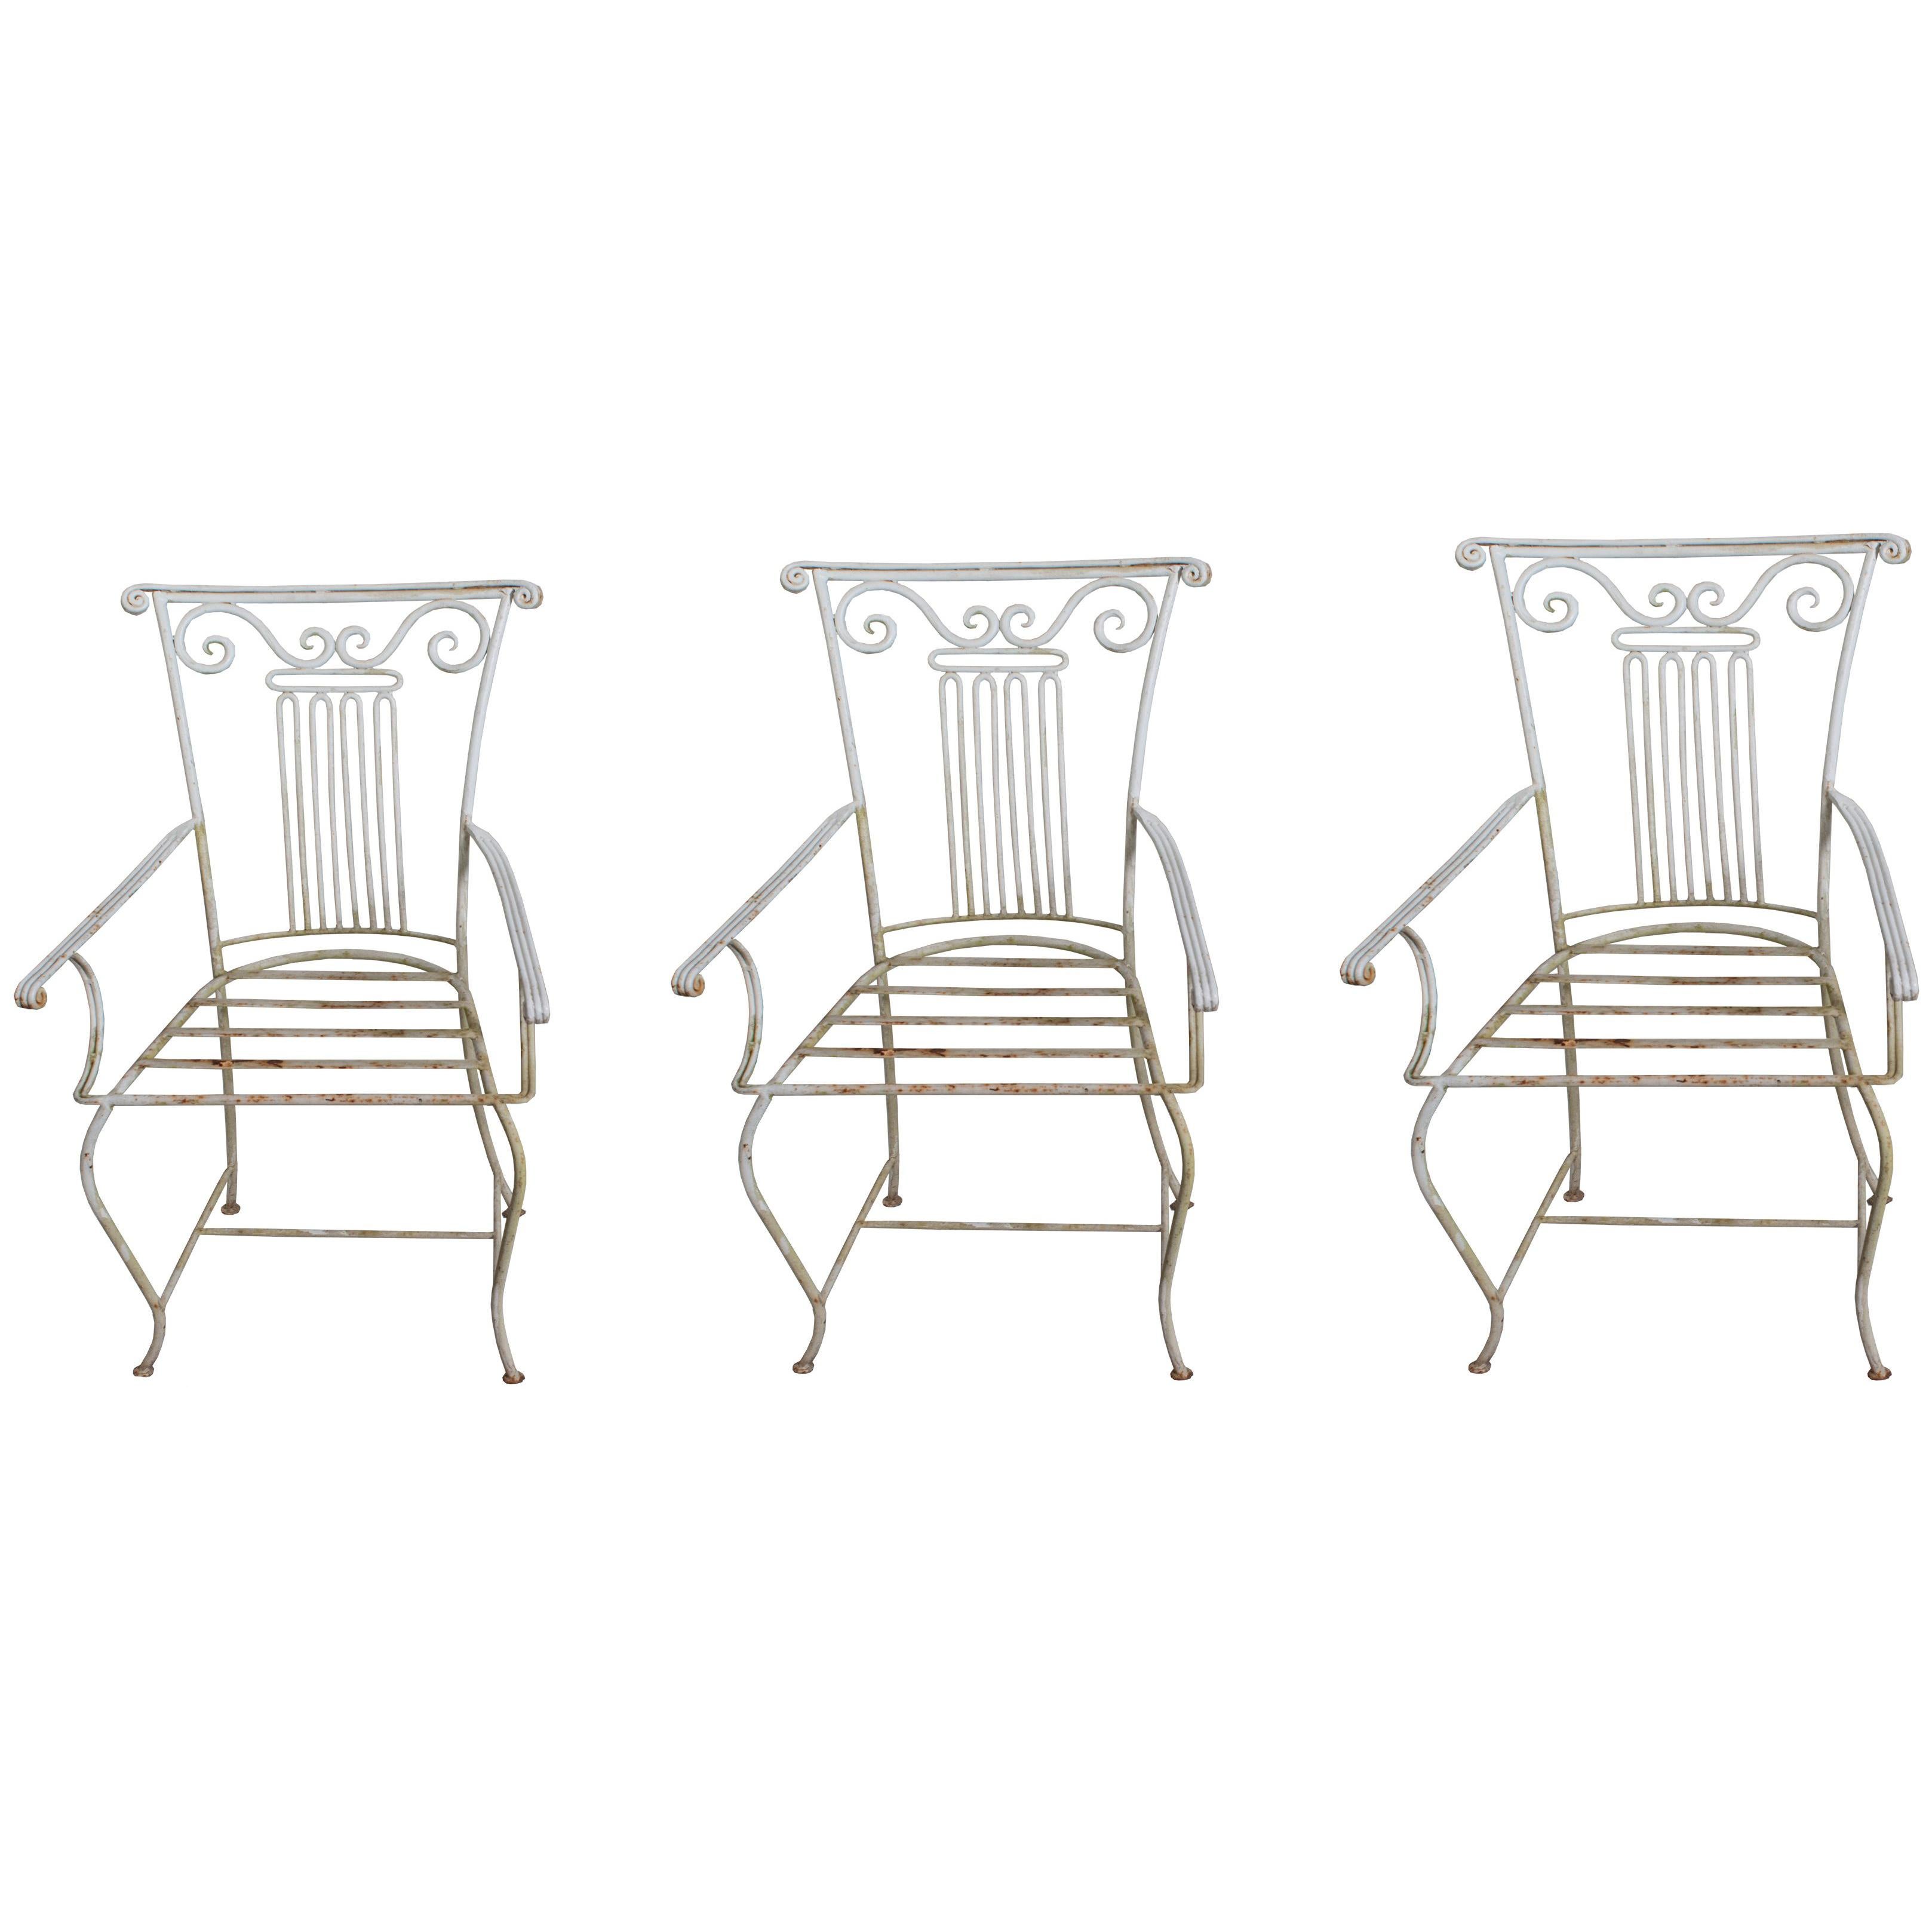 Three Neoclassical Wrought Iron Garden Chairs sold individually